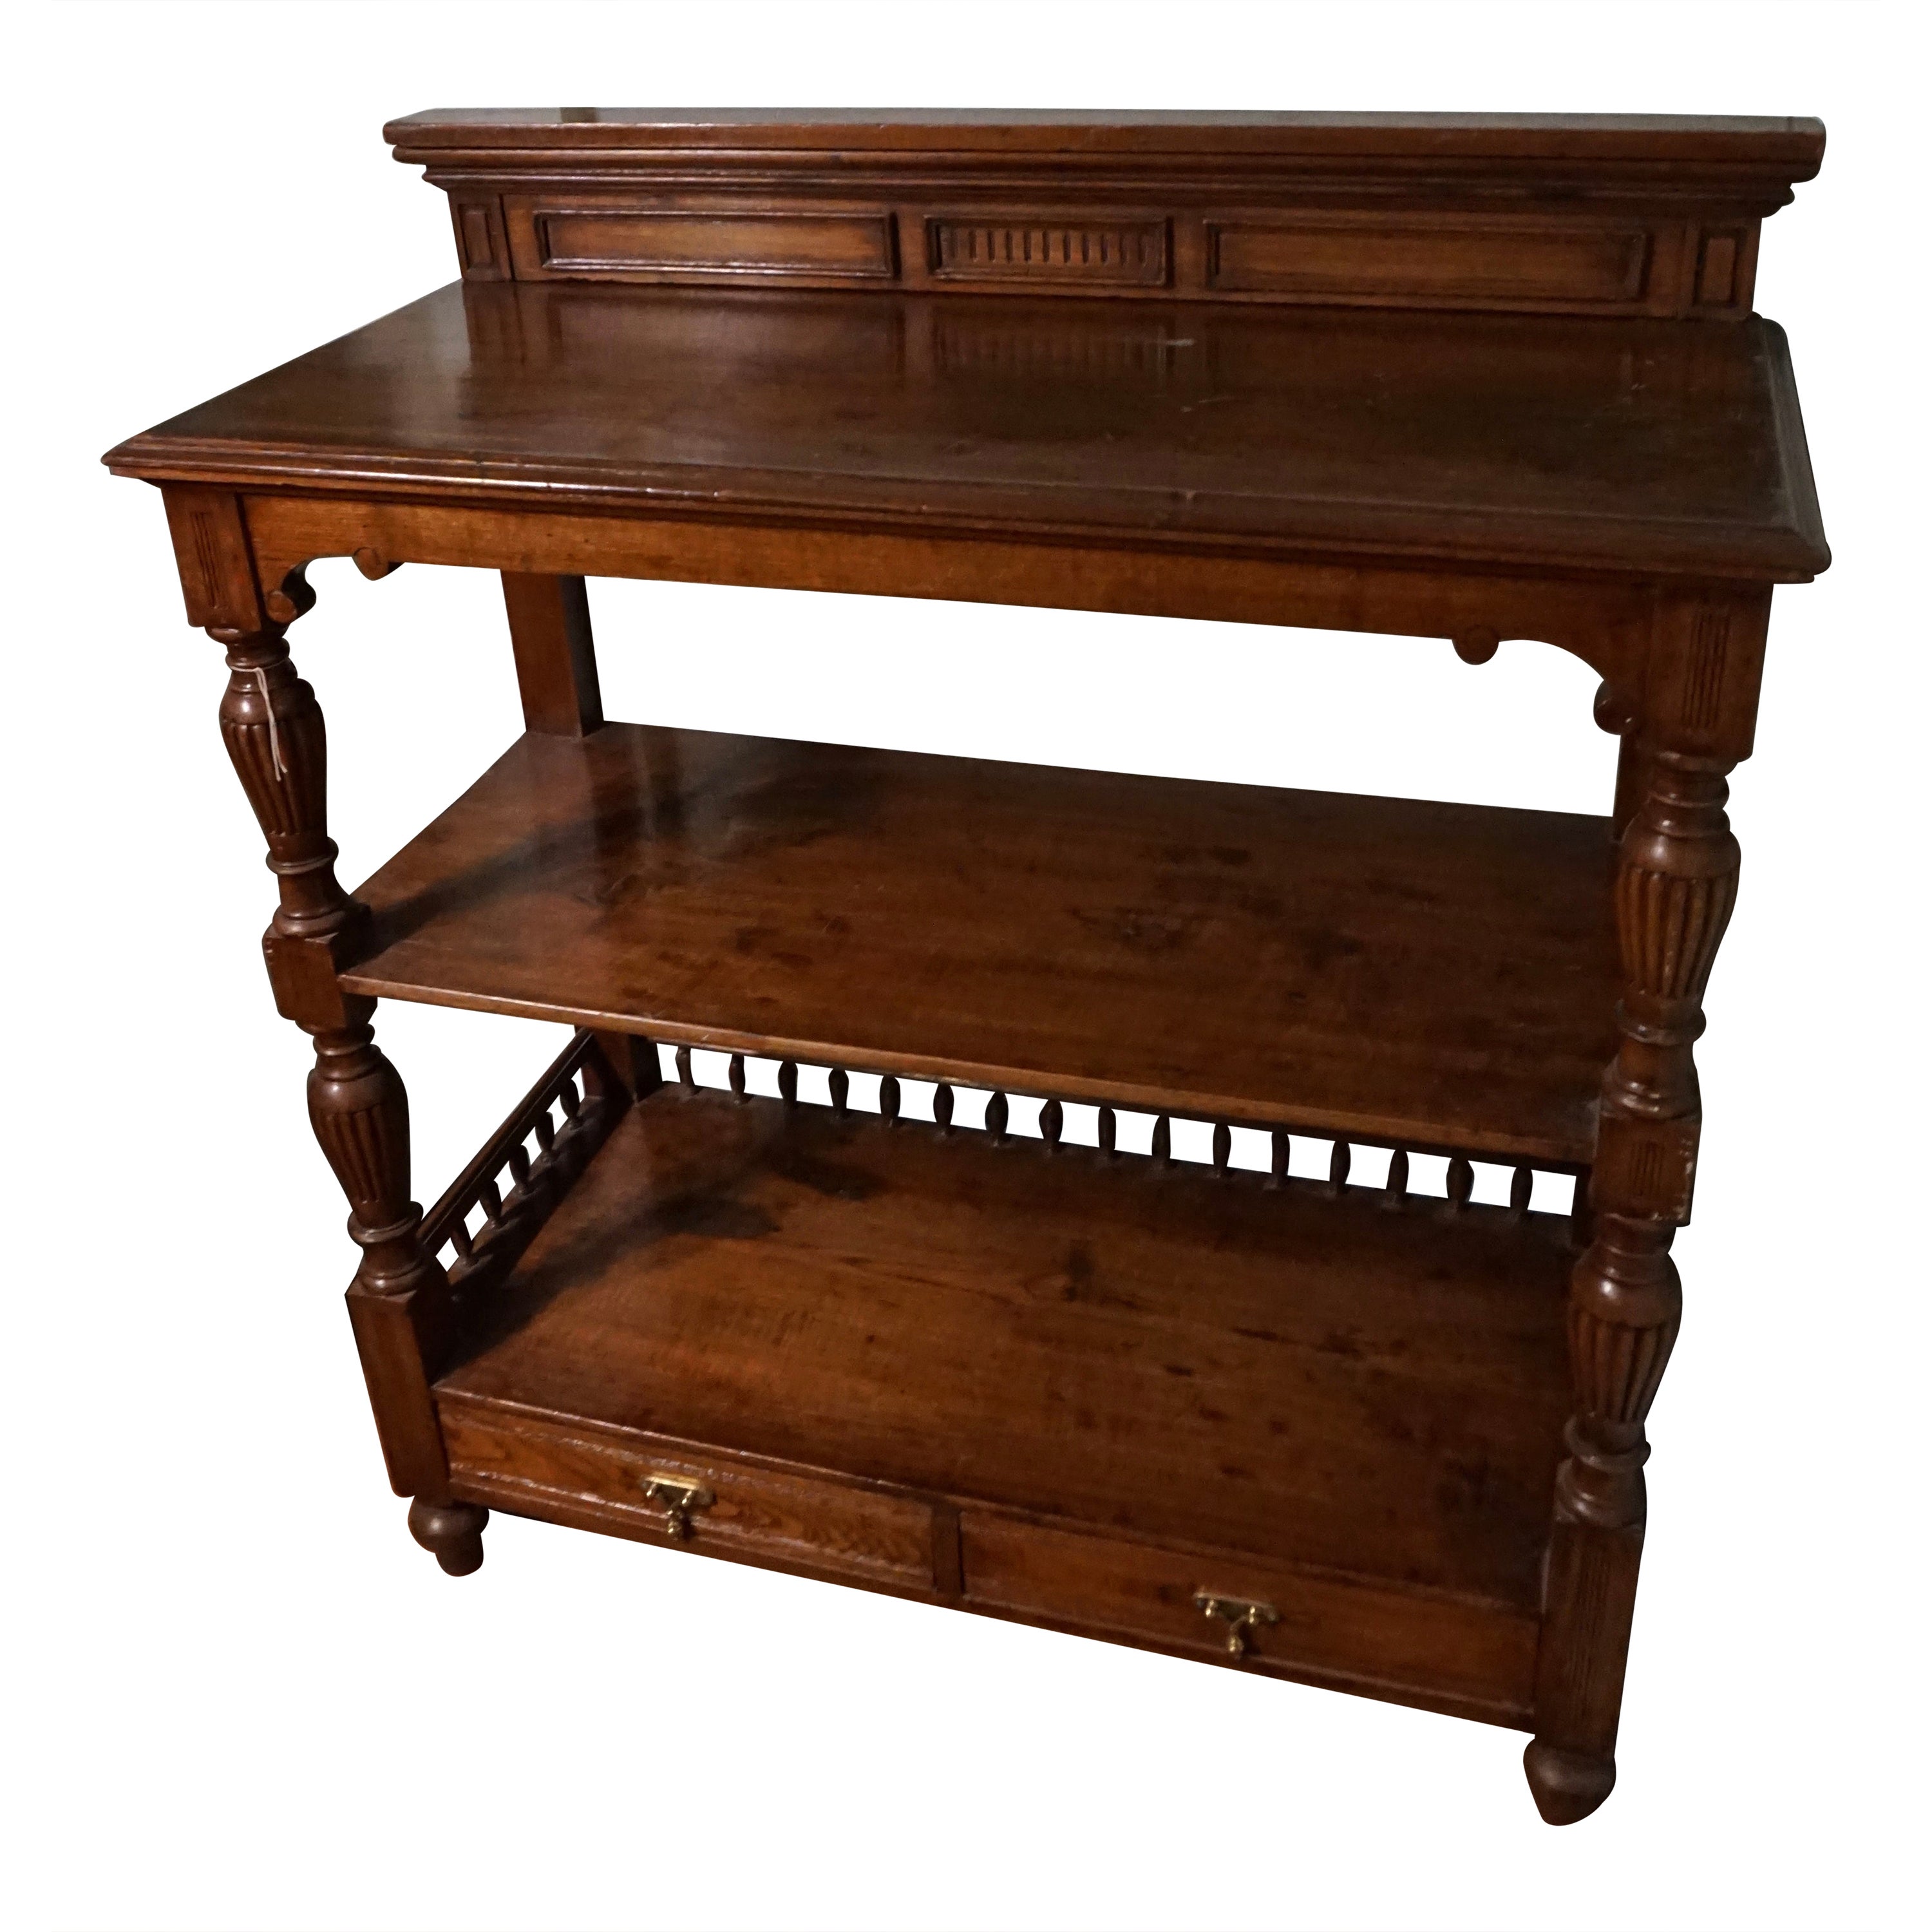 Solid Teak Hand Carved Colonial Whatnot Rack with Shelves & Drawers For Sale